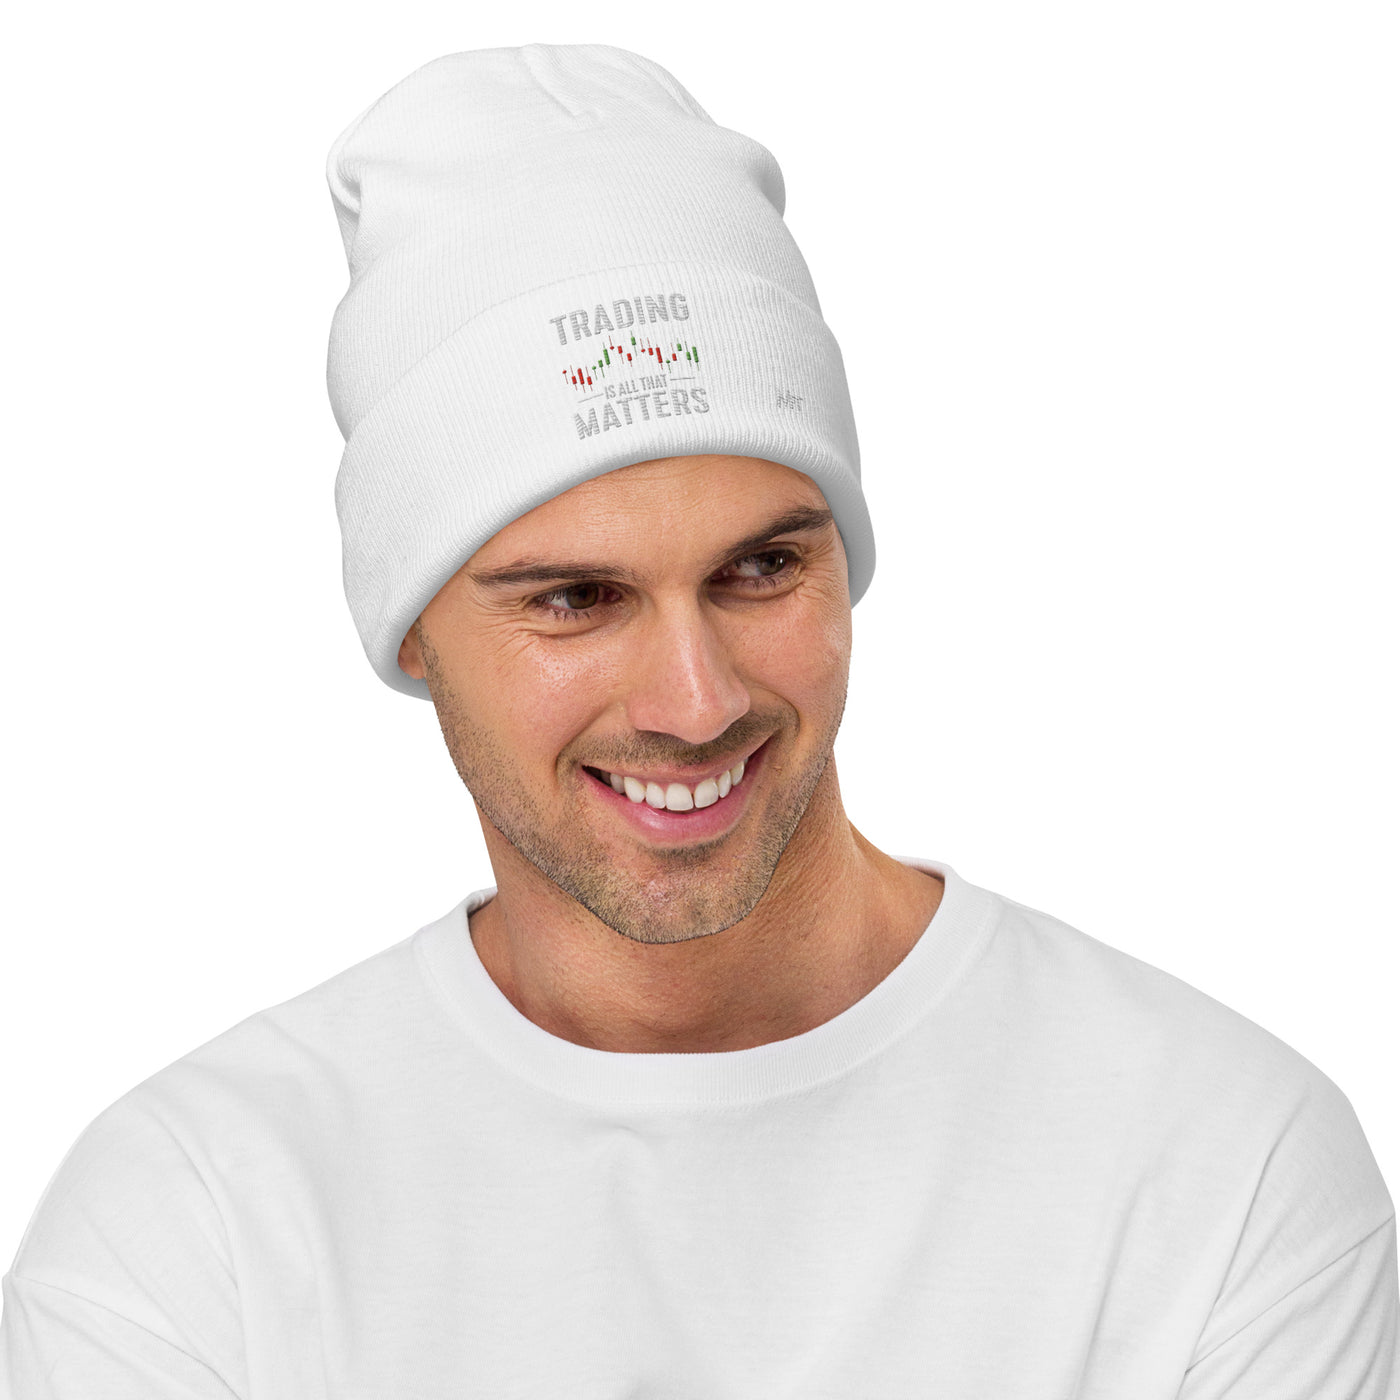 Trading is all that Matters - Embroidered Beanie